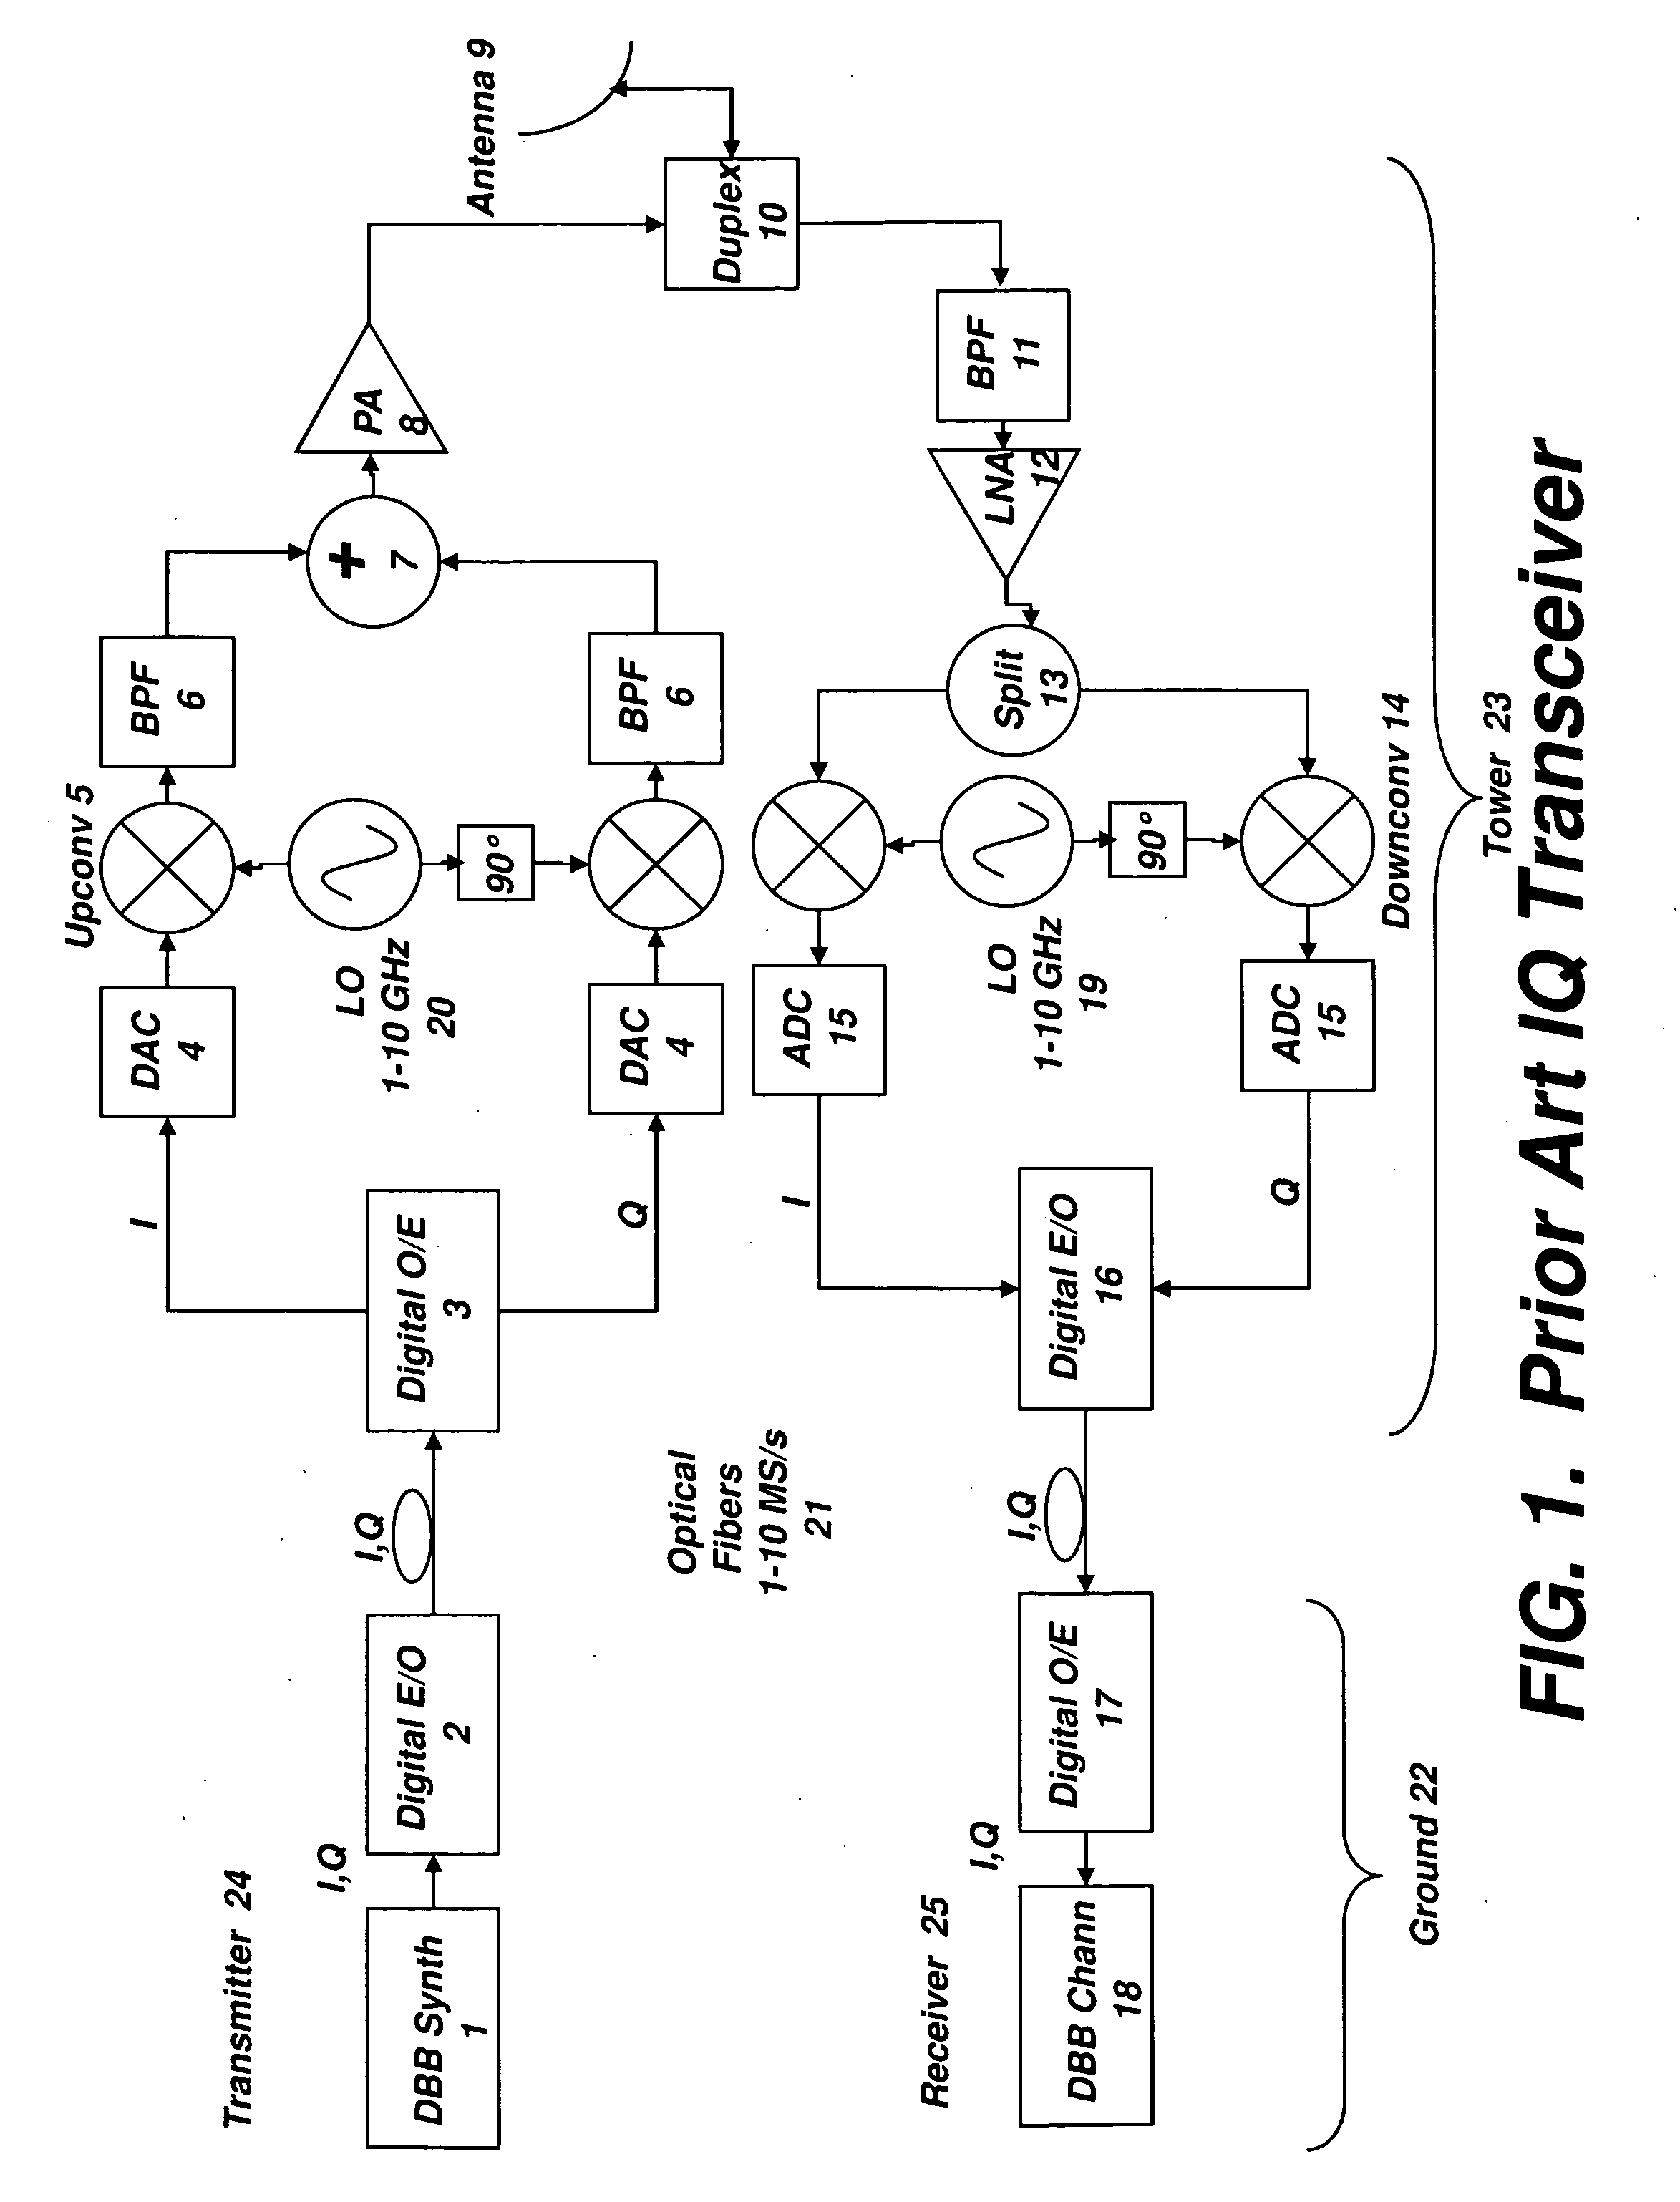 Digital radio frequency tranceiver system and method